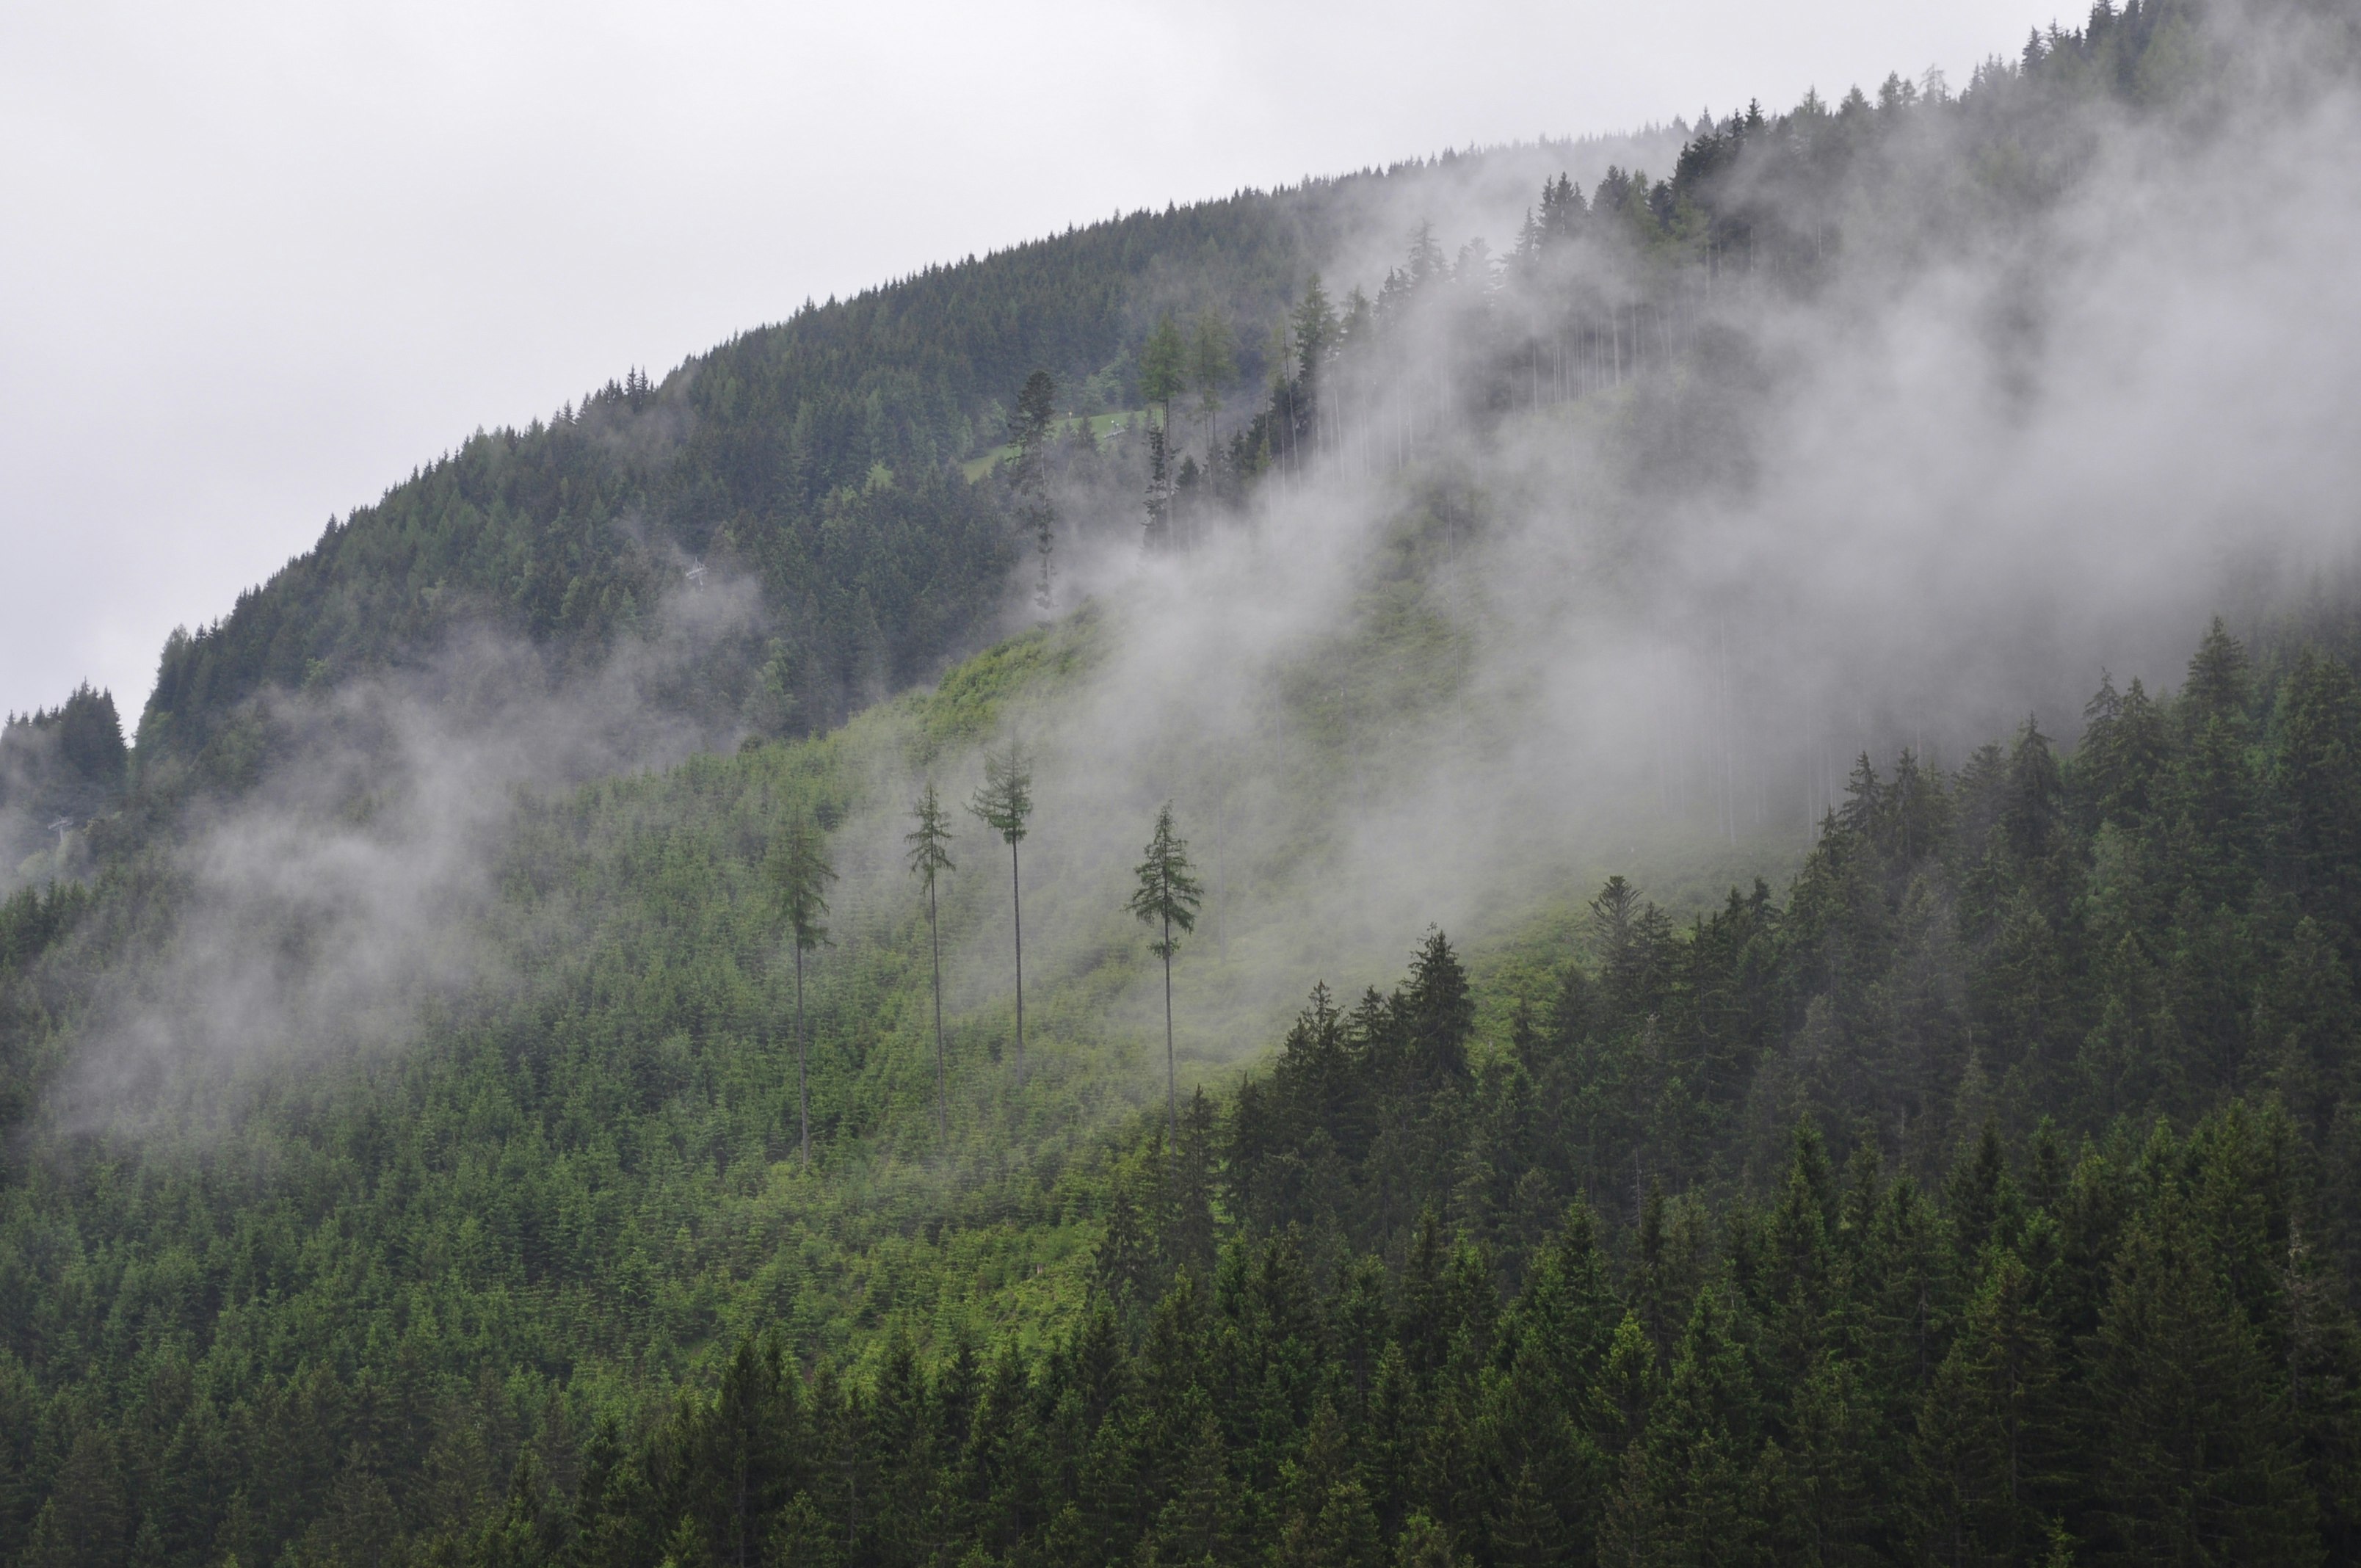 green leafed trees on mountains during fogs